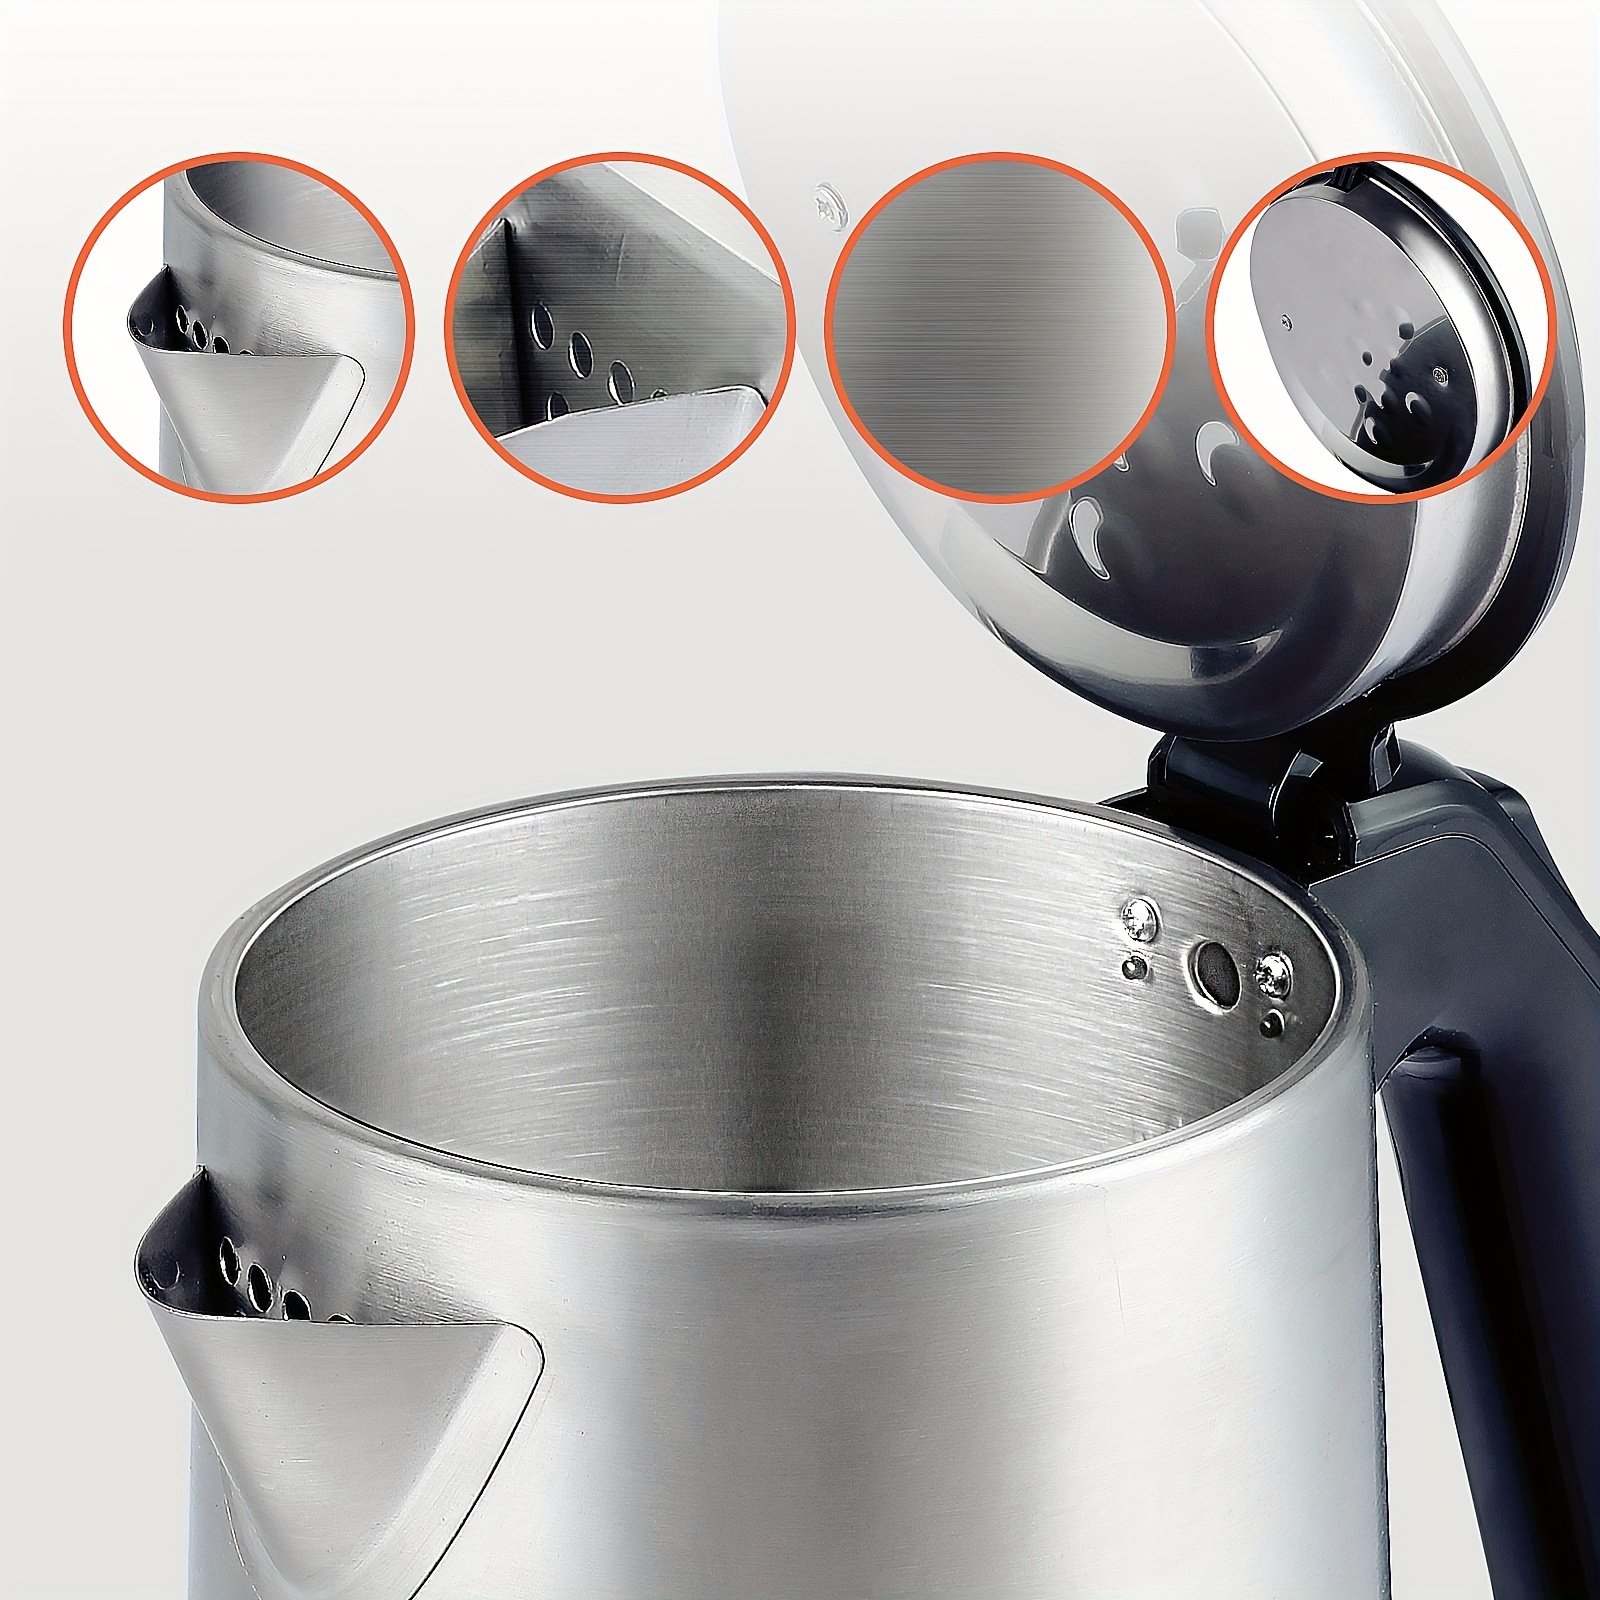 Electric Tea Kettle For Boiling Water, Stainless Steel Double Wall